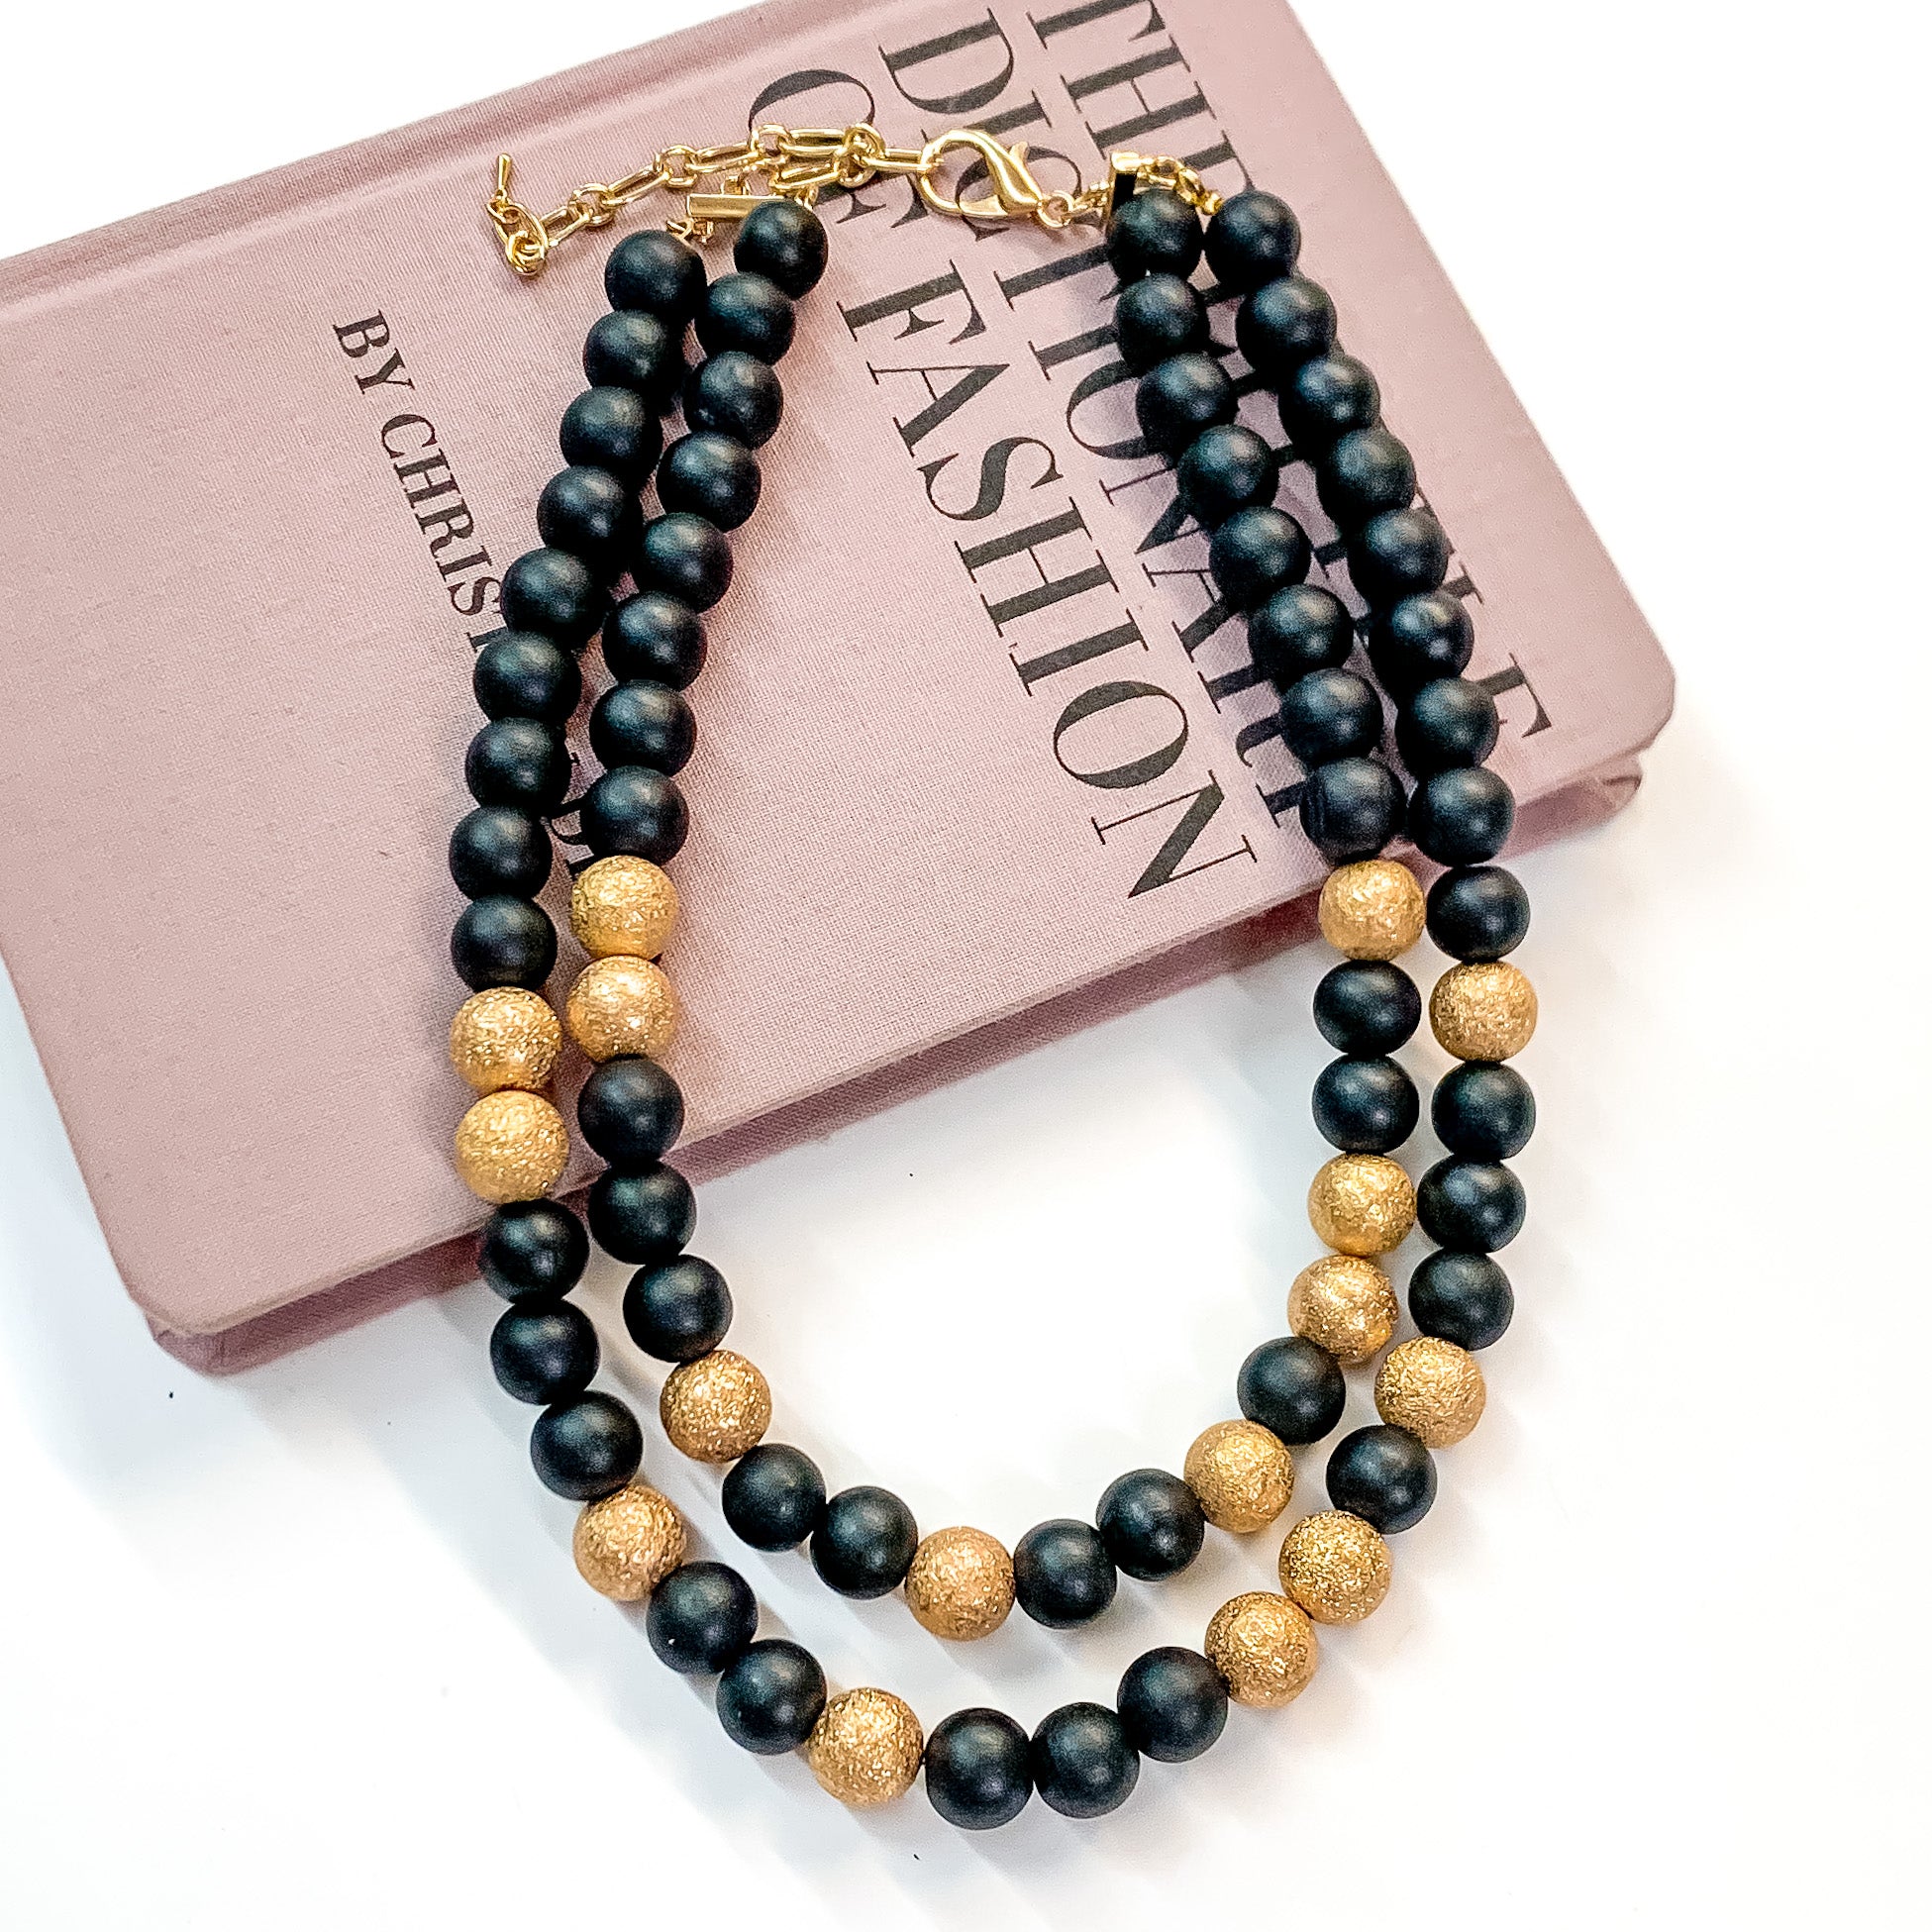 Pictured partially on a mauve colored book on a white background is a two strand black beaded necklace with gold beaded spacers and gold hardware. 